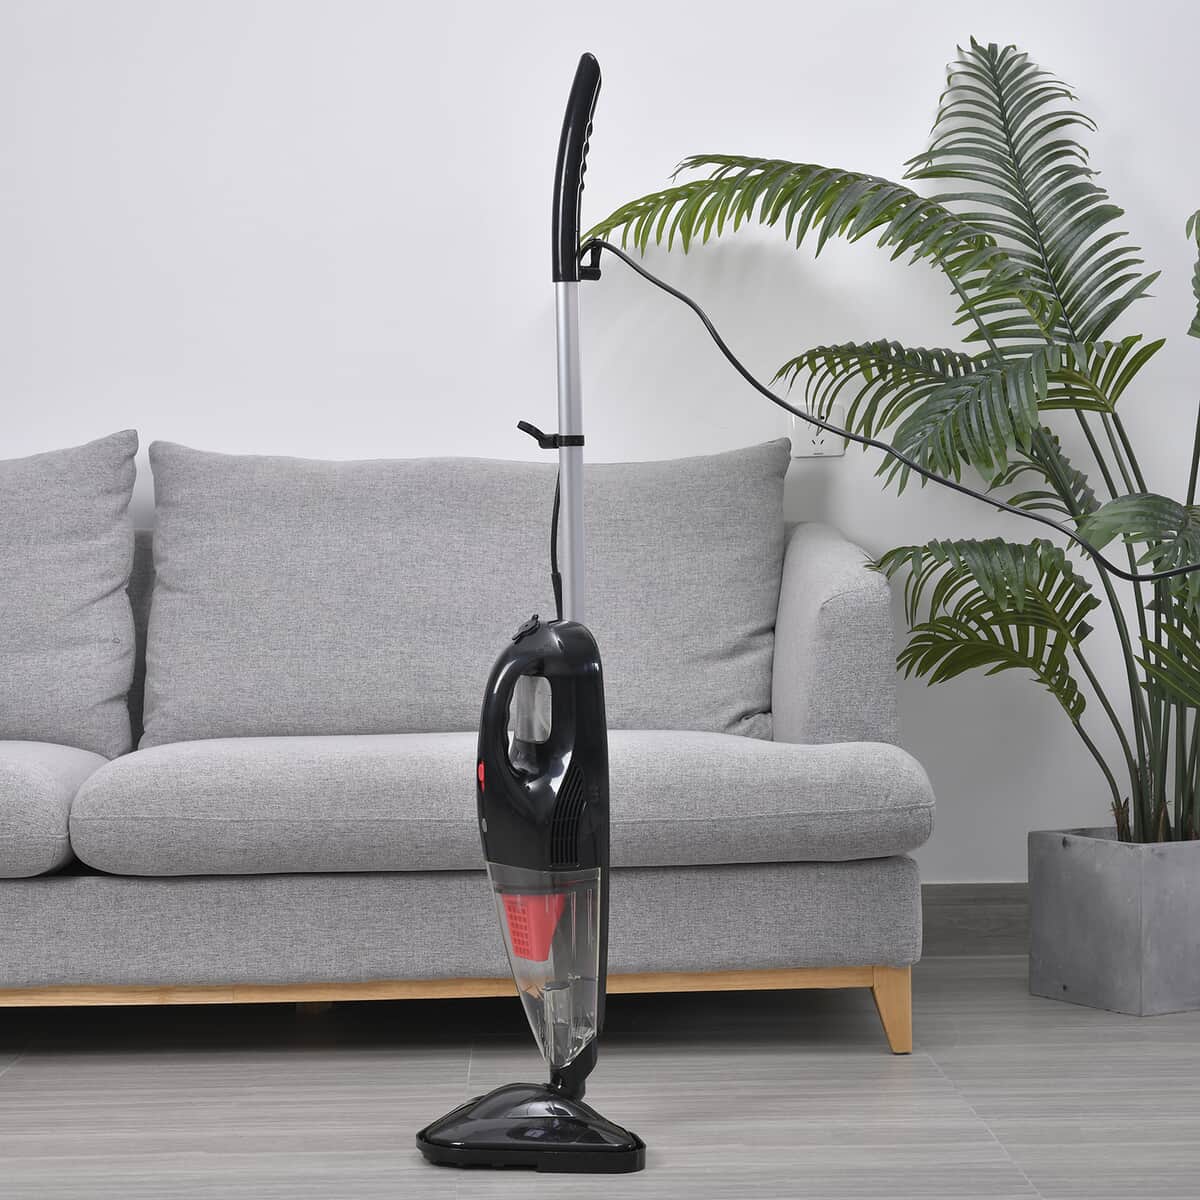 TLV HOMESMART Black Handheld Compact Wet and Dry Vacuum and Steam Cleaner (49.2"x11.8"x9.8") image number 1